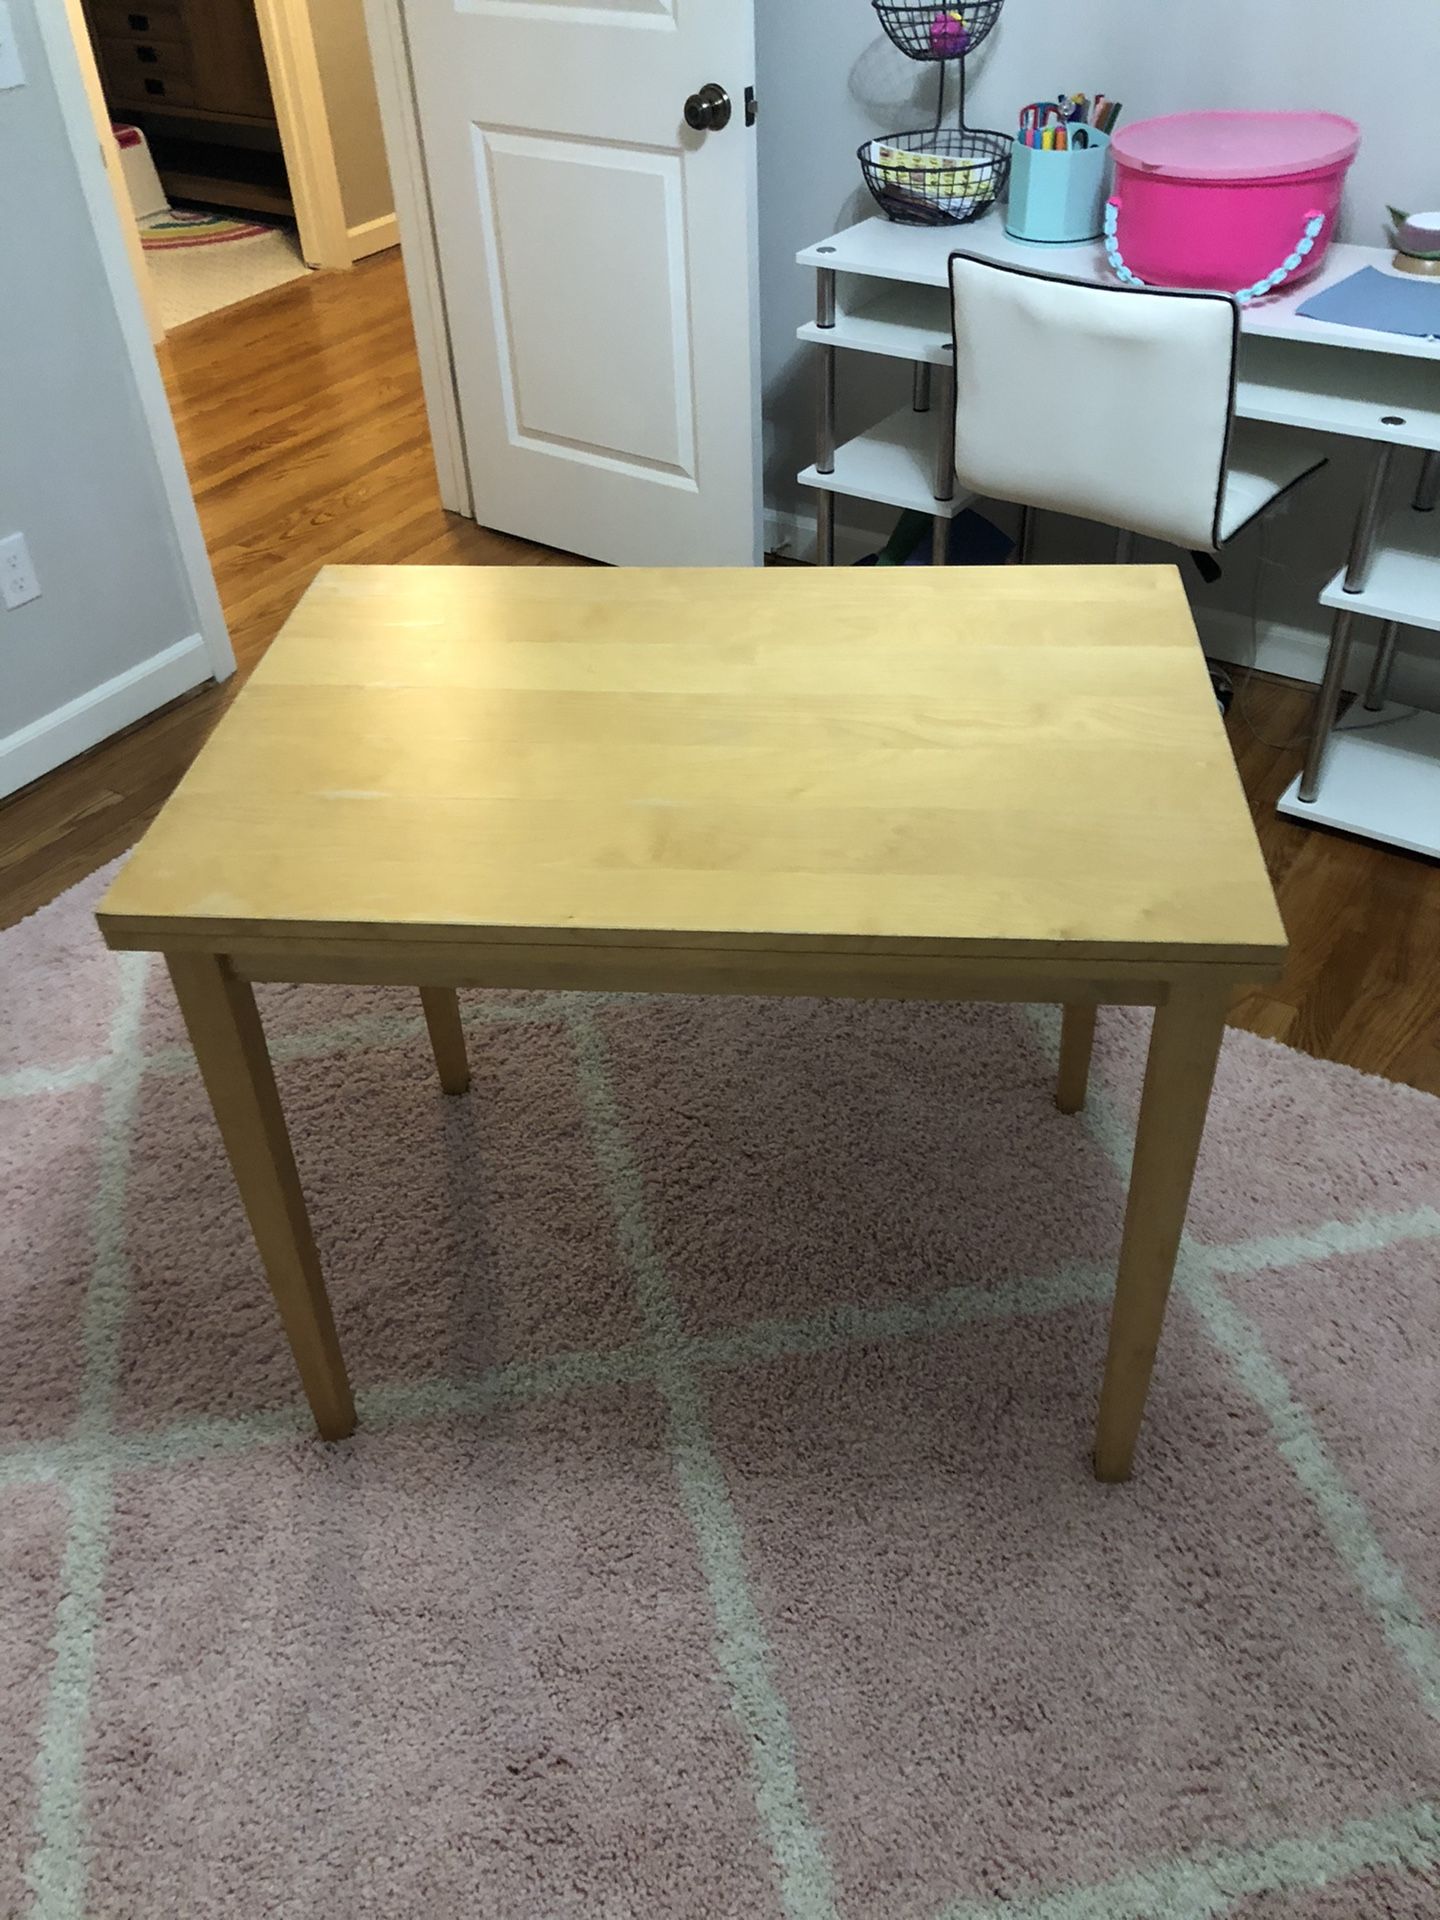 Breakfast nook table with two chairs